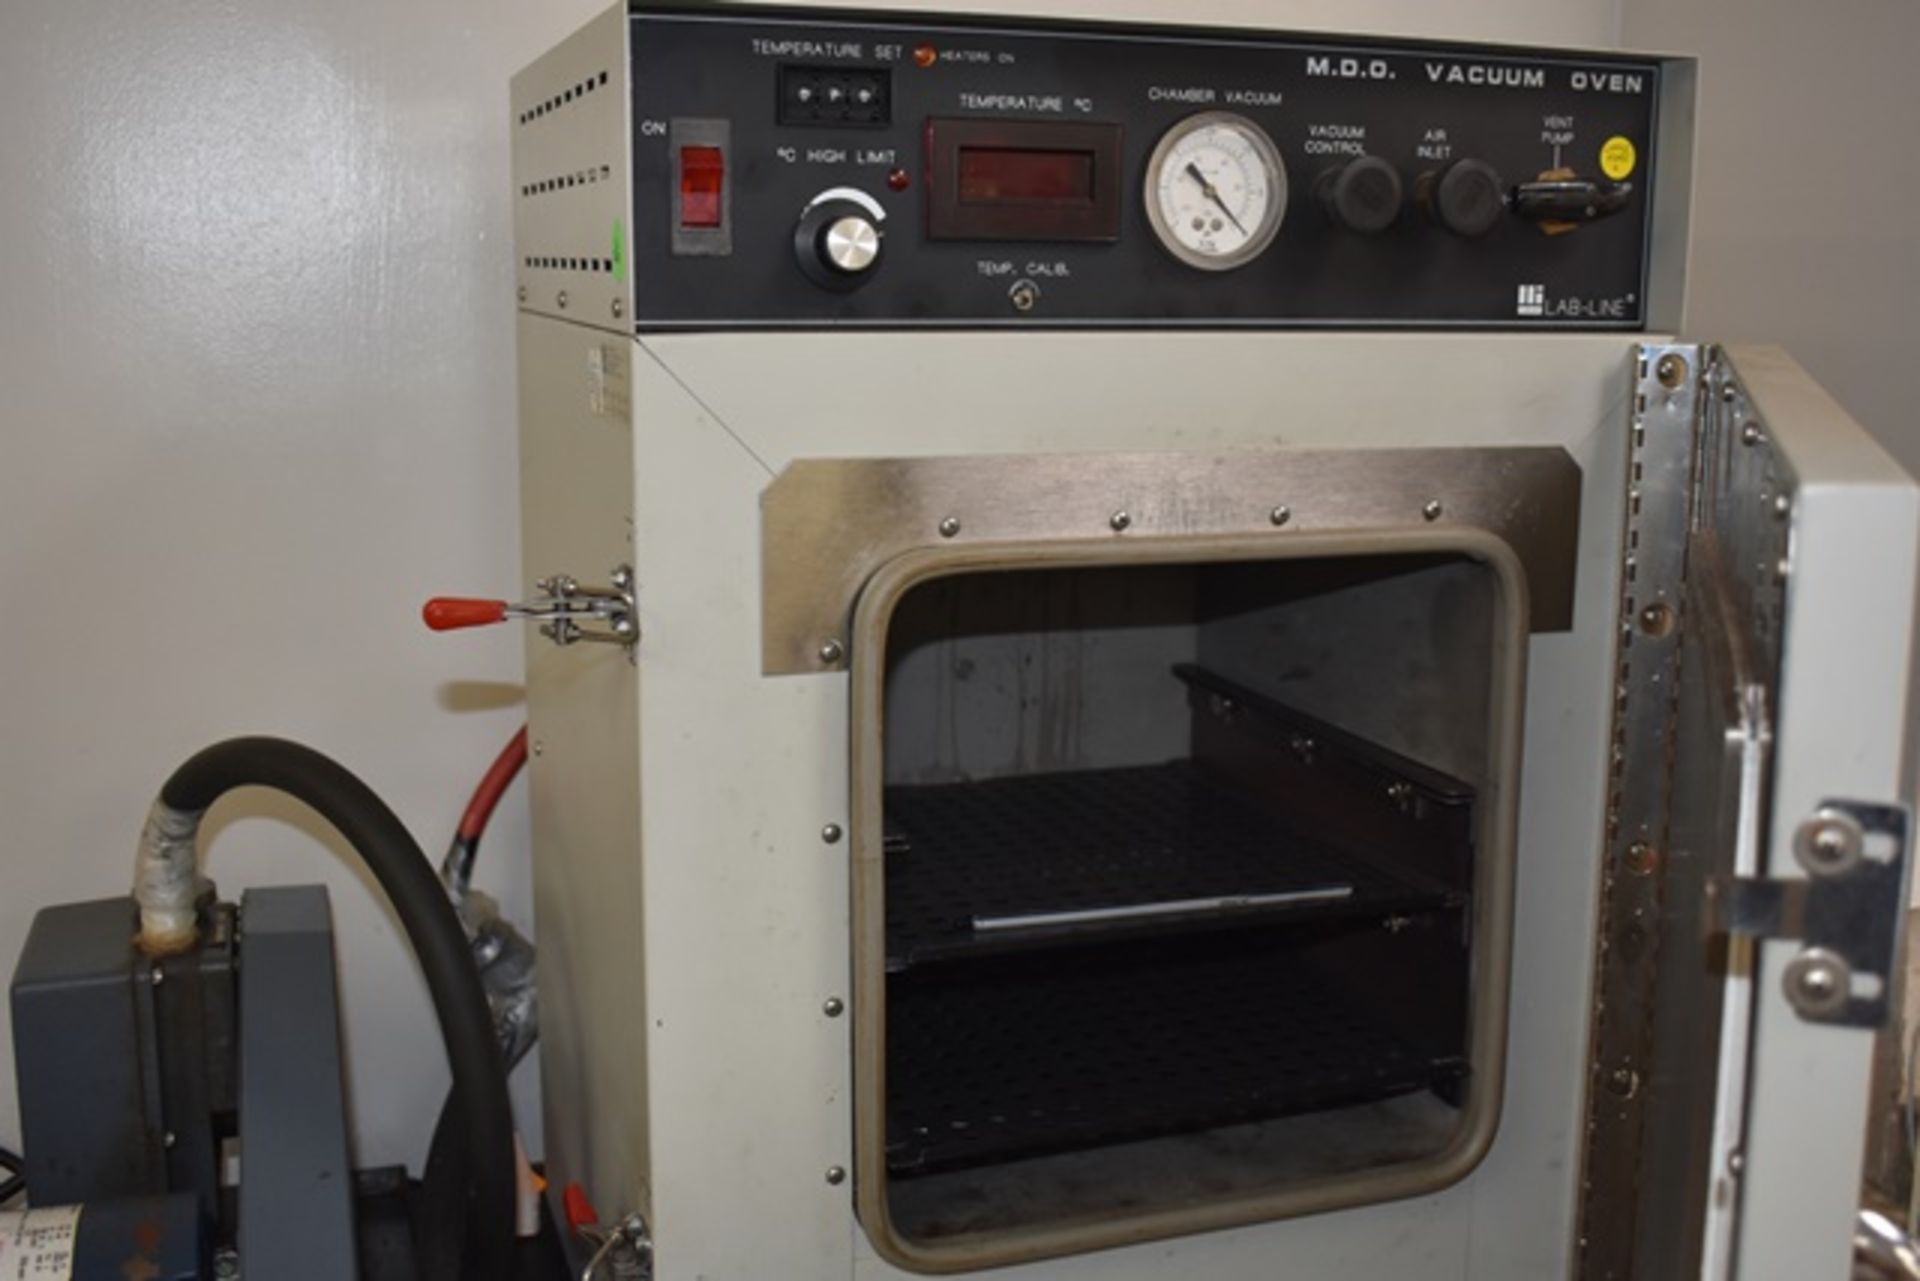 Lab Line vacuum oven, mod. 3623 MDD, s/n 10950015 with Welch 1399 dual seal vacuum pump, 1/3 hp - Image 2 of 2